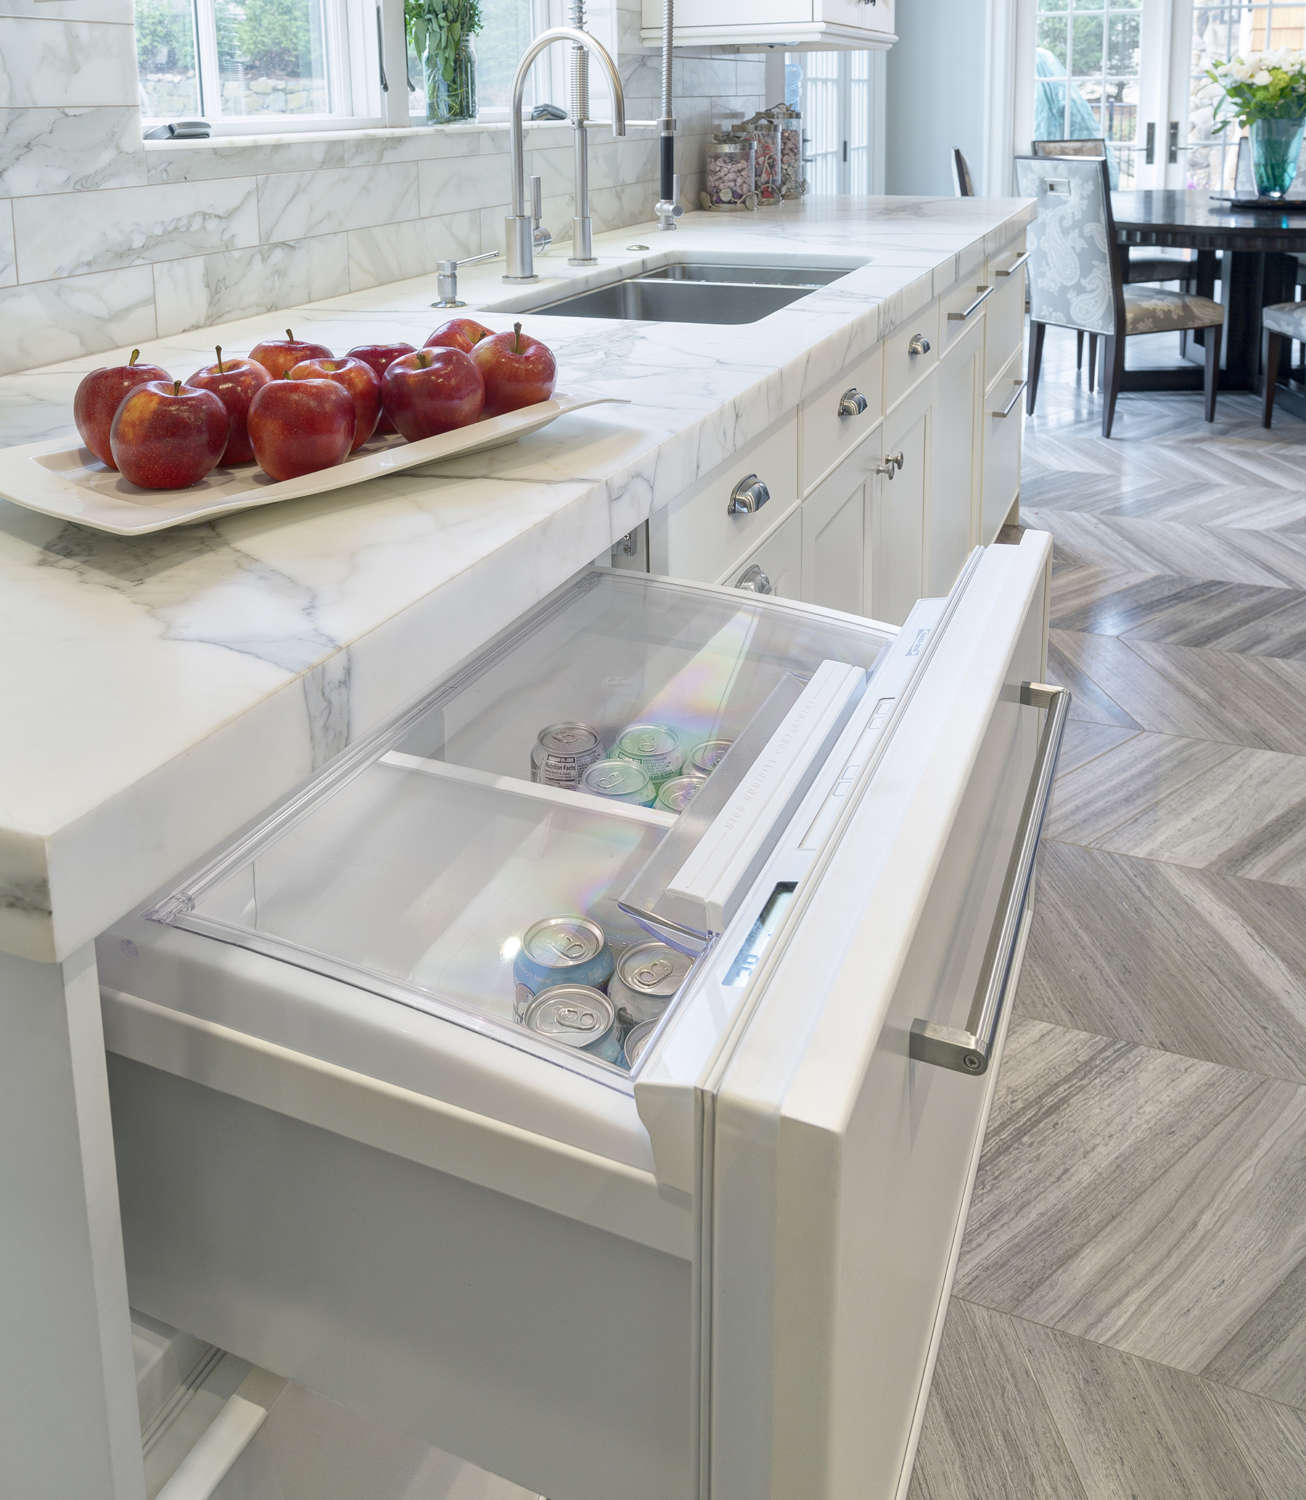 Kitchen features wood herringbone flooring and white bilotta cabinetry with under-counter beverage drawer and stainless hardware.